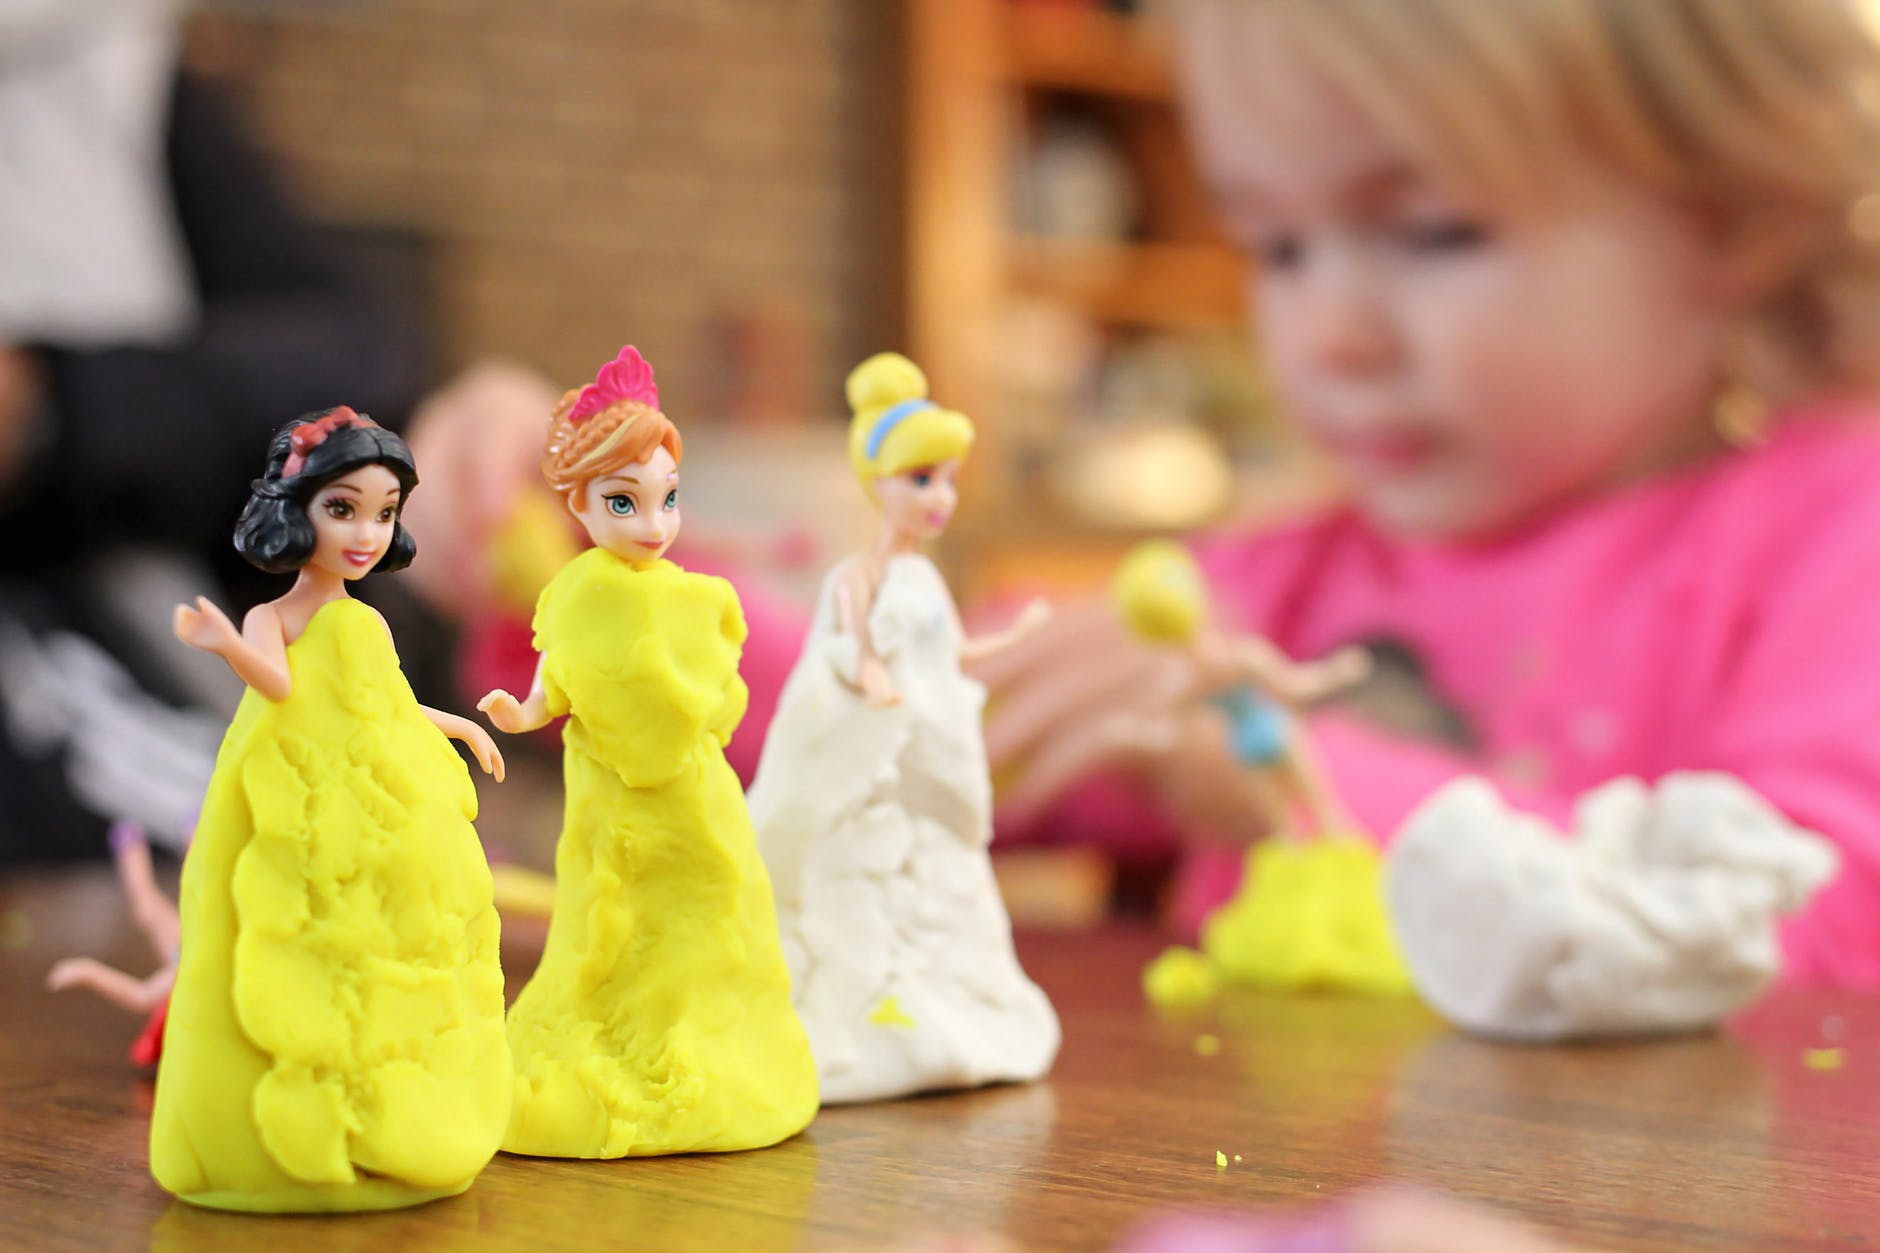 Child molds princess bodies out of clay.